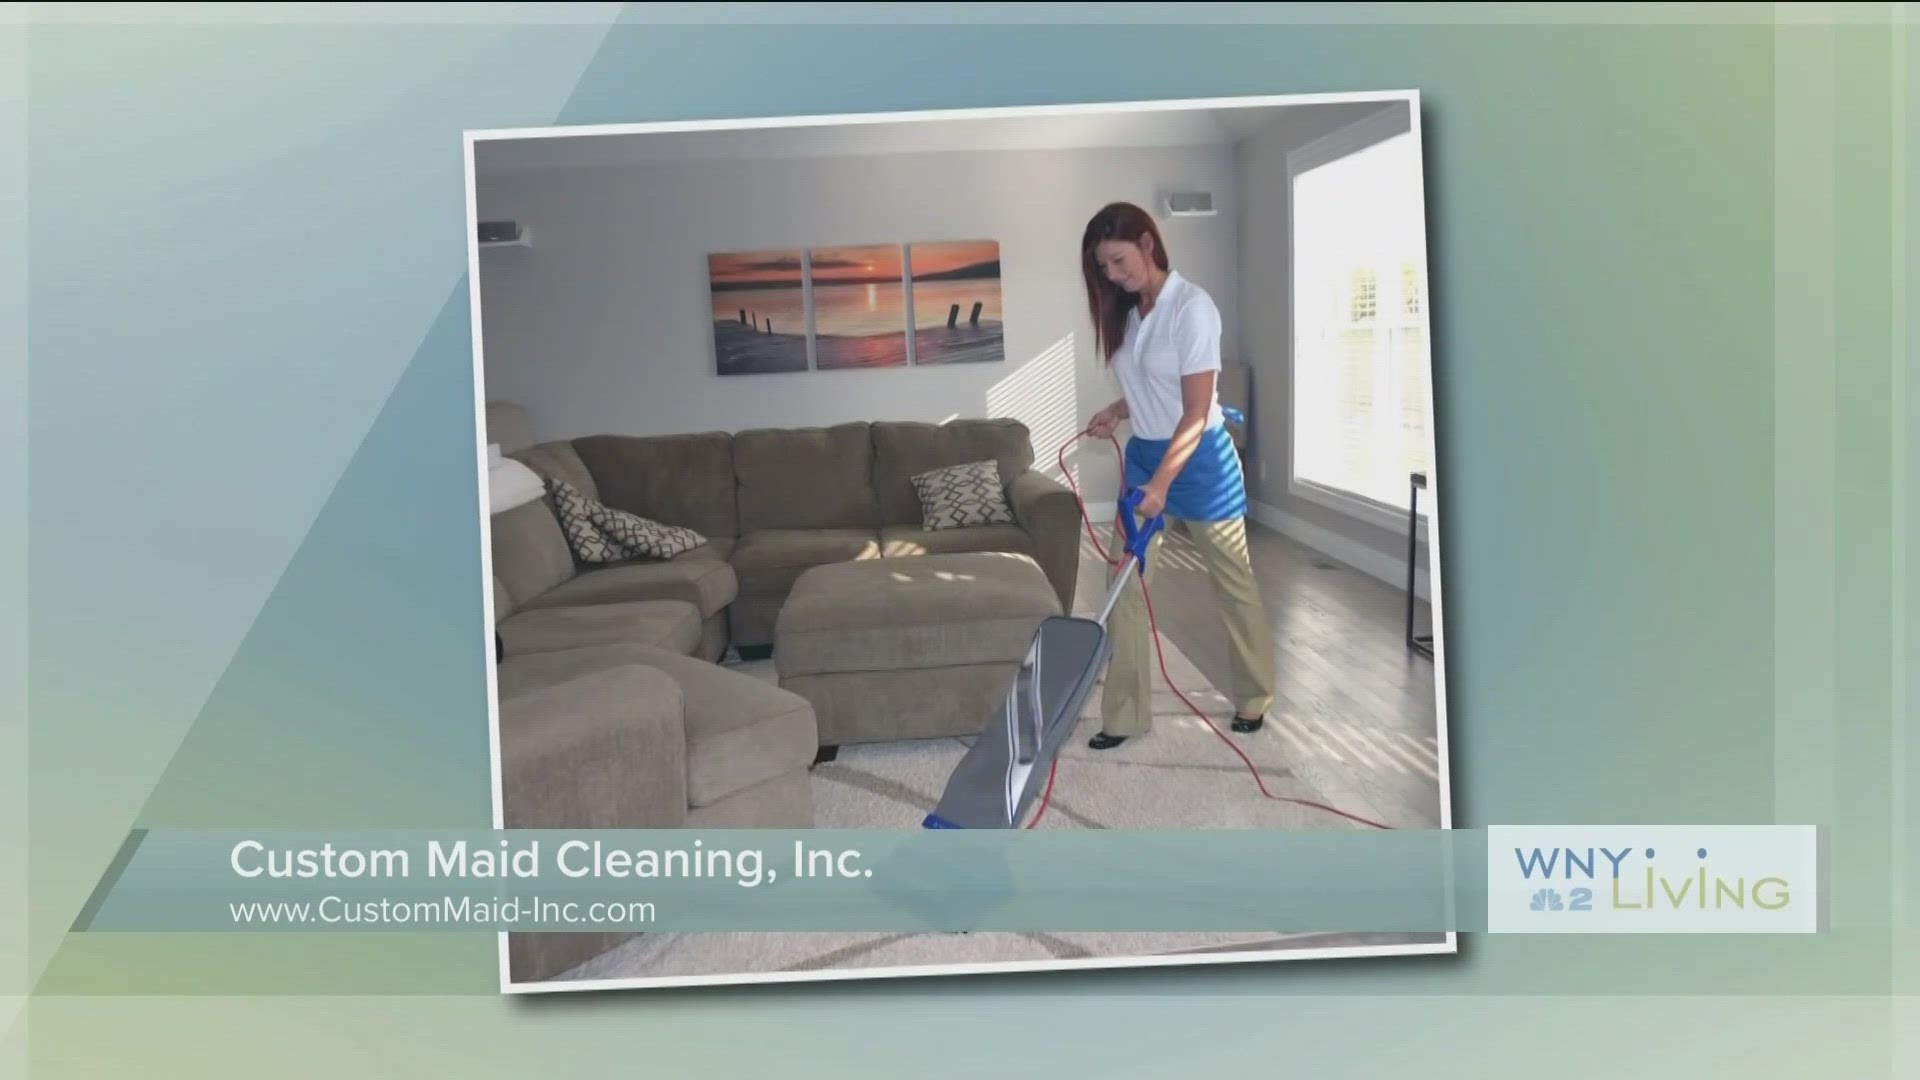 WNY Living - May 6 - Custom Maid Cleaning, Inc. (THIS VIDEO IS SPONSORED BY CUSTOM MAID CLEANING, INC.)